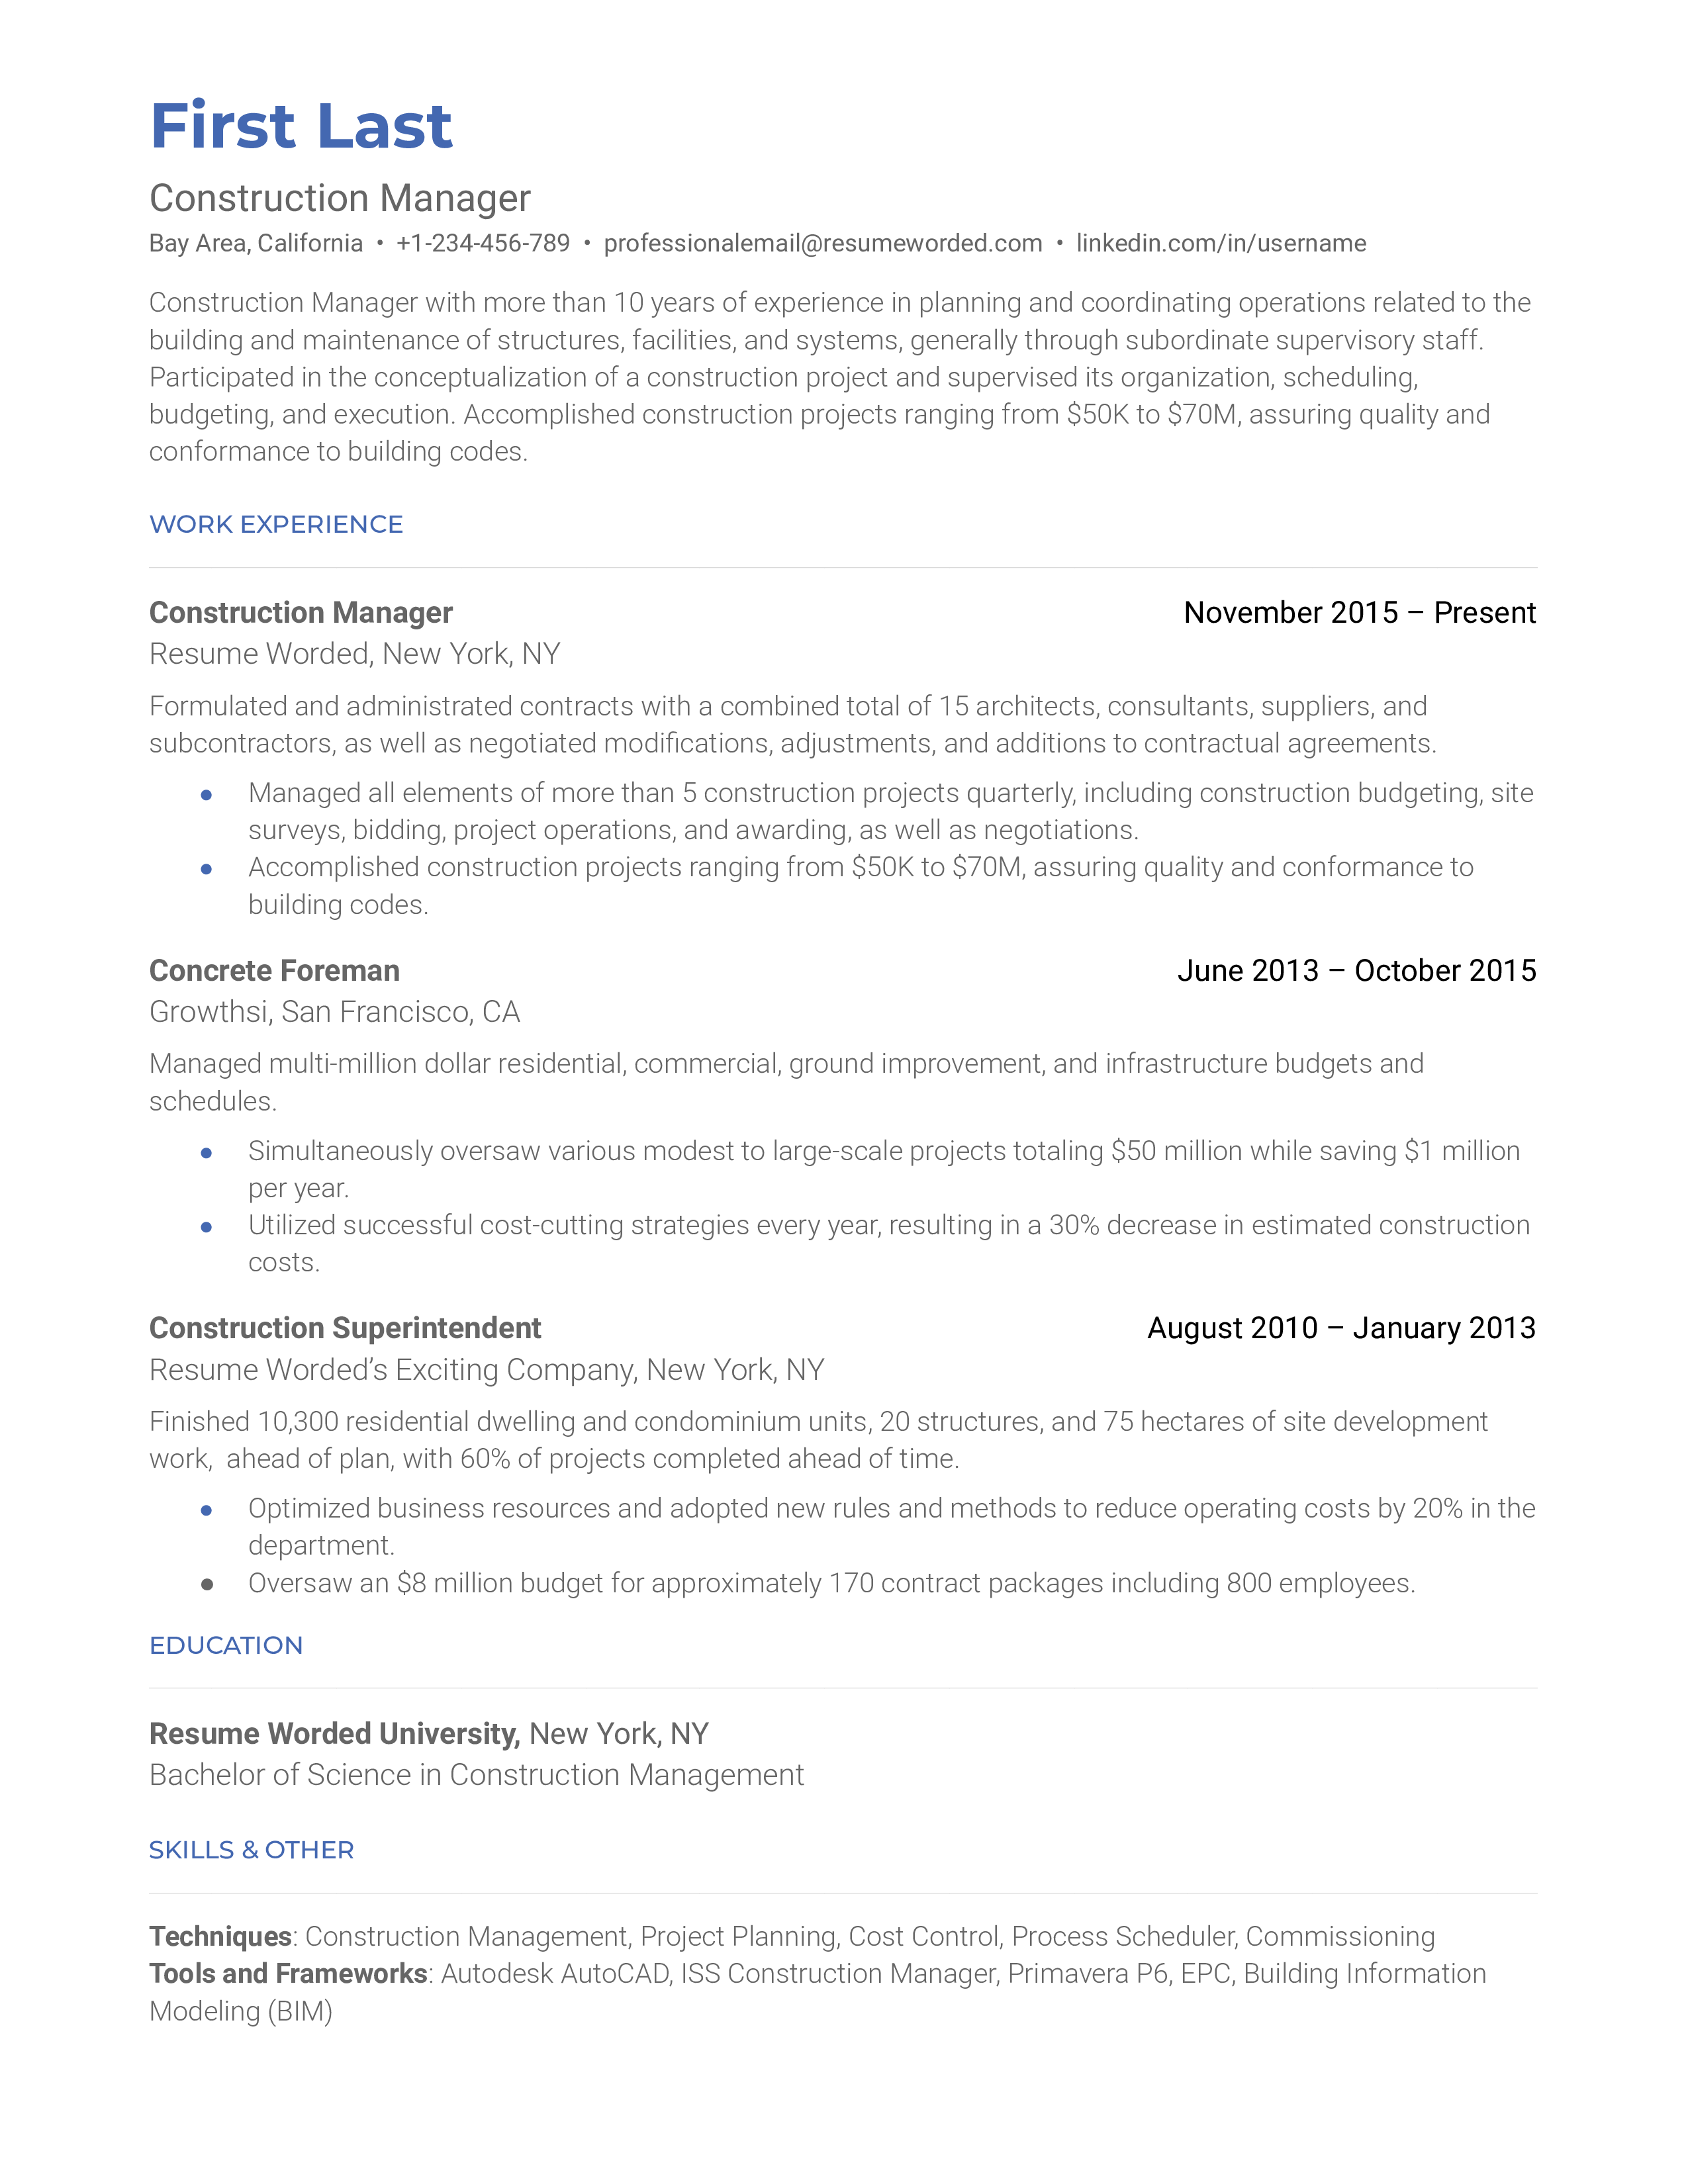 This is a construction manager resume template focusing on the applicant's experience and achievements.